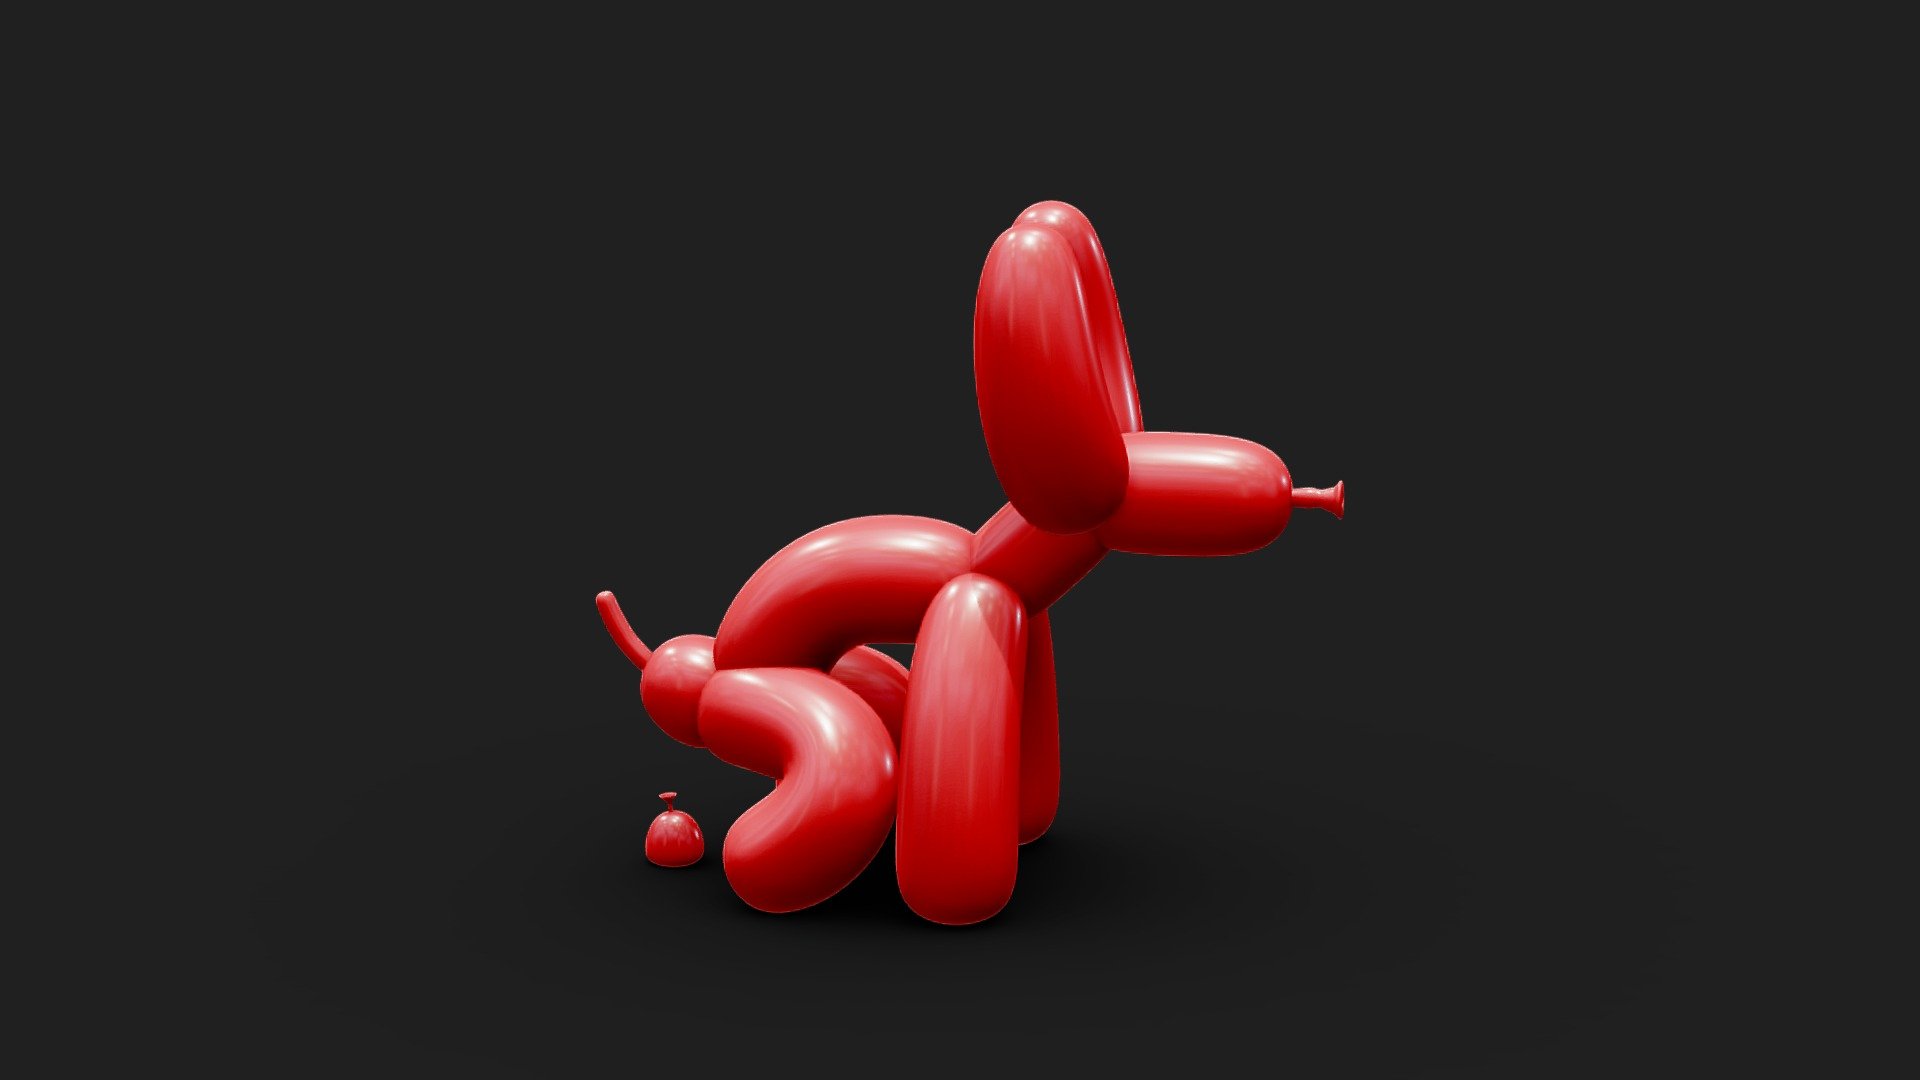 Pooping Balloon Sausage Dog

Pooping Balloon Sausage Dog Available in various versions, The PBR low-poly and Decimated to STL format for easy 3D printing, adds a touch of whimsy and humor to your decor.




Format: FBX, OBJ, MTL, STL, glb, glTF, Blender v3.6.2

Decimated STL version with high detail for 3D print.

Optimized UVs (Non-Overlapping UVs)

PBR Textures | 1024x1024 - 2048x2048 - 4096x4096 | (1K, 2K, 4K - Jpeg, Png)

Base Color (Albedo)

Normal Map

AO Map

Metallic Map

Roughness Map

Height Map
 - Pooping Balloon Sausage Dog - Buy Royalty Free 3D model by Nima (@h3ydari96) 3d model